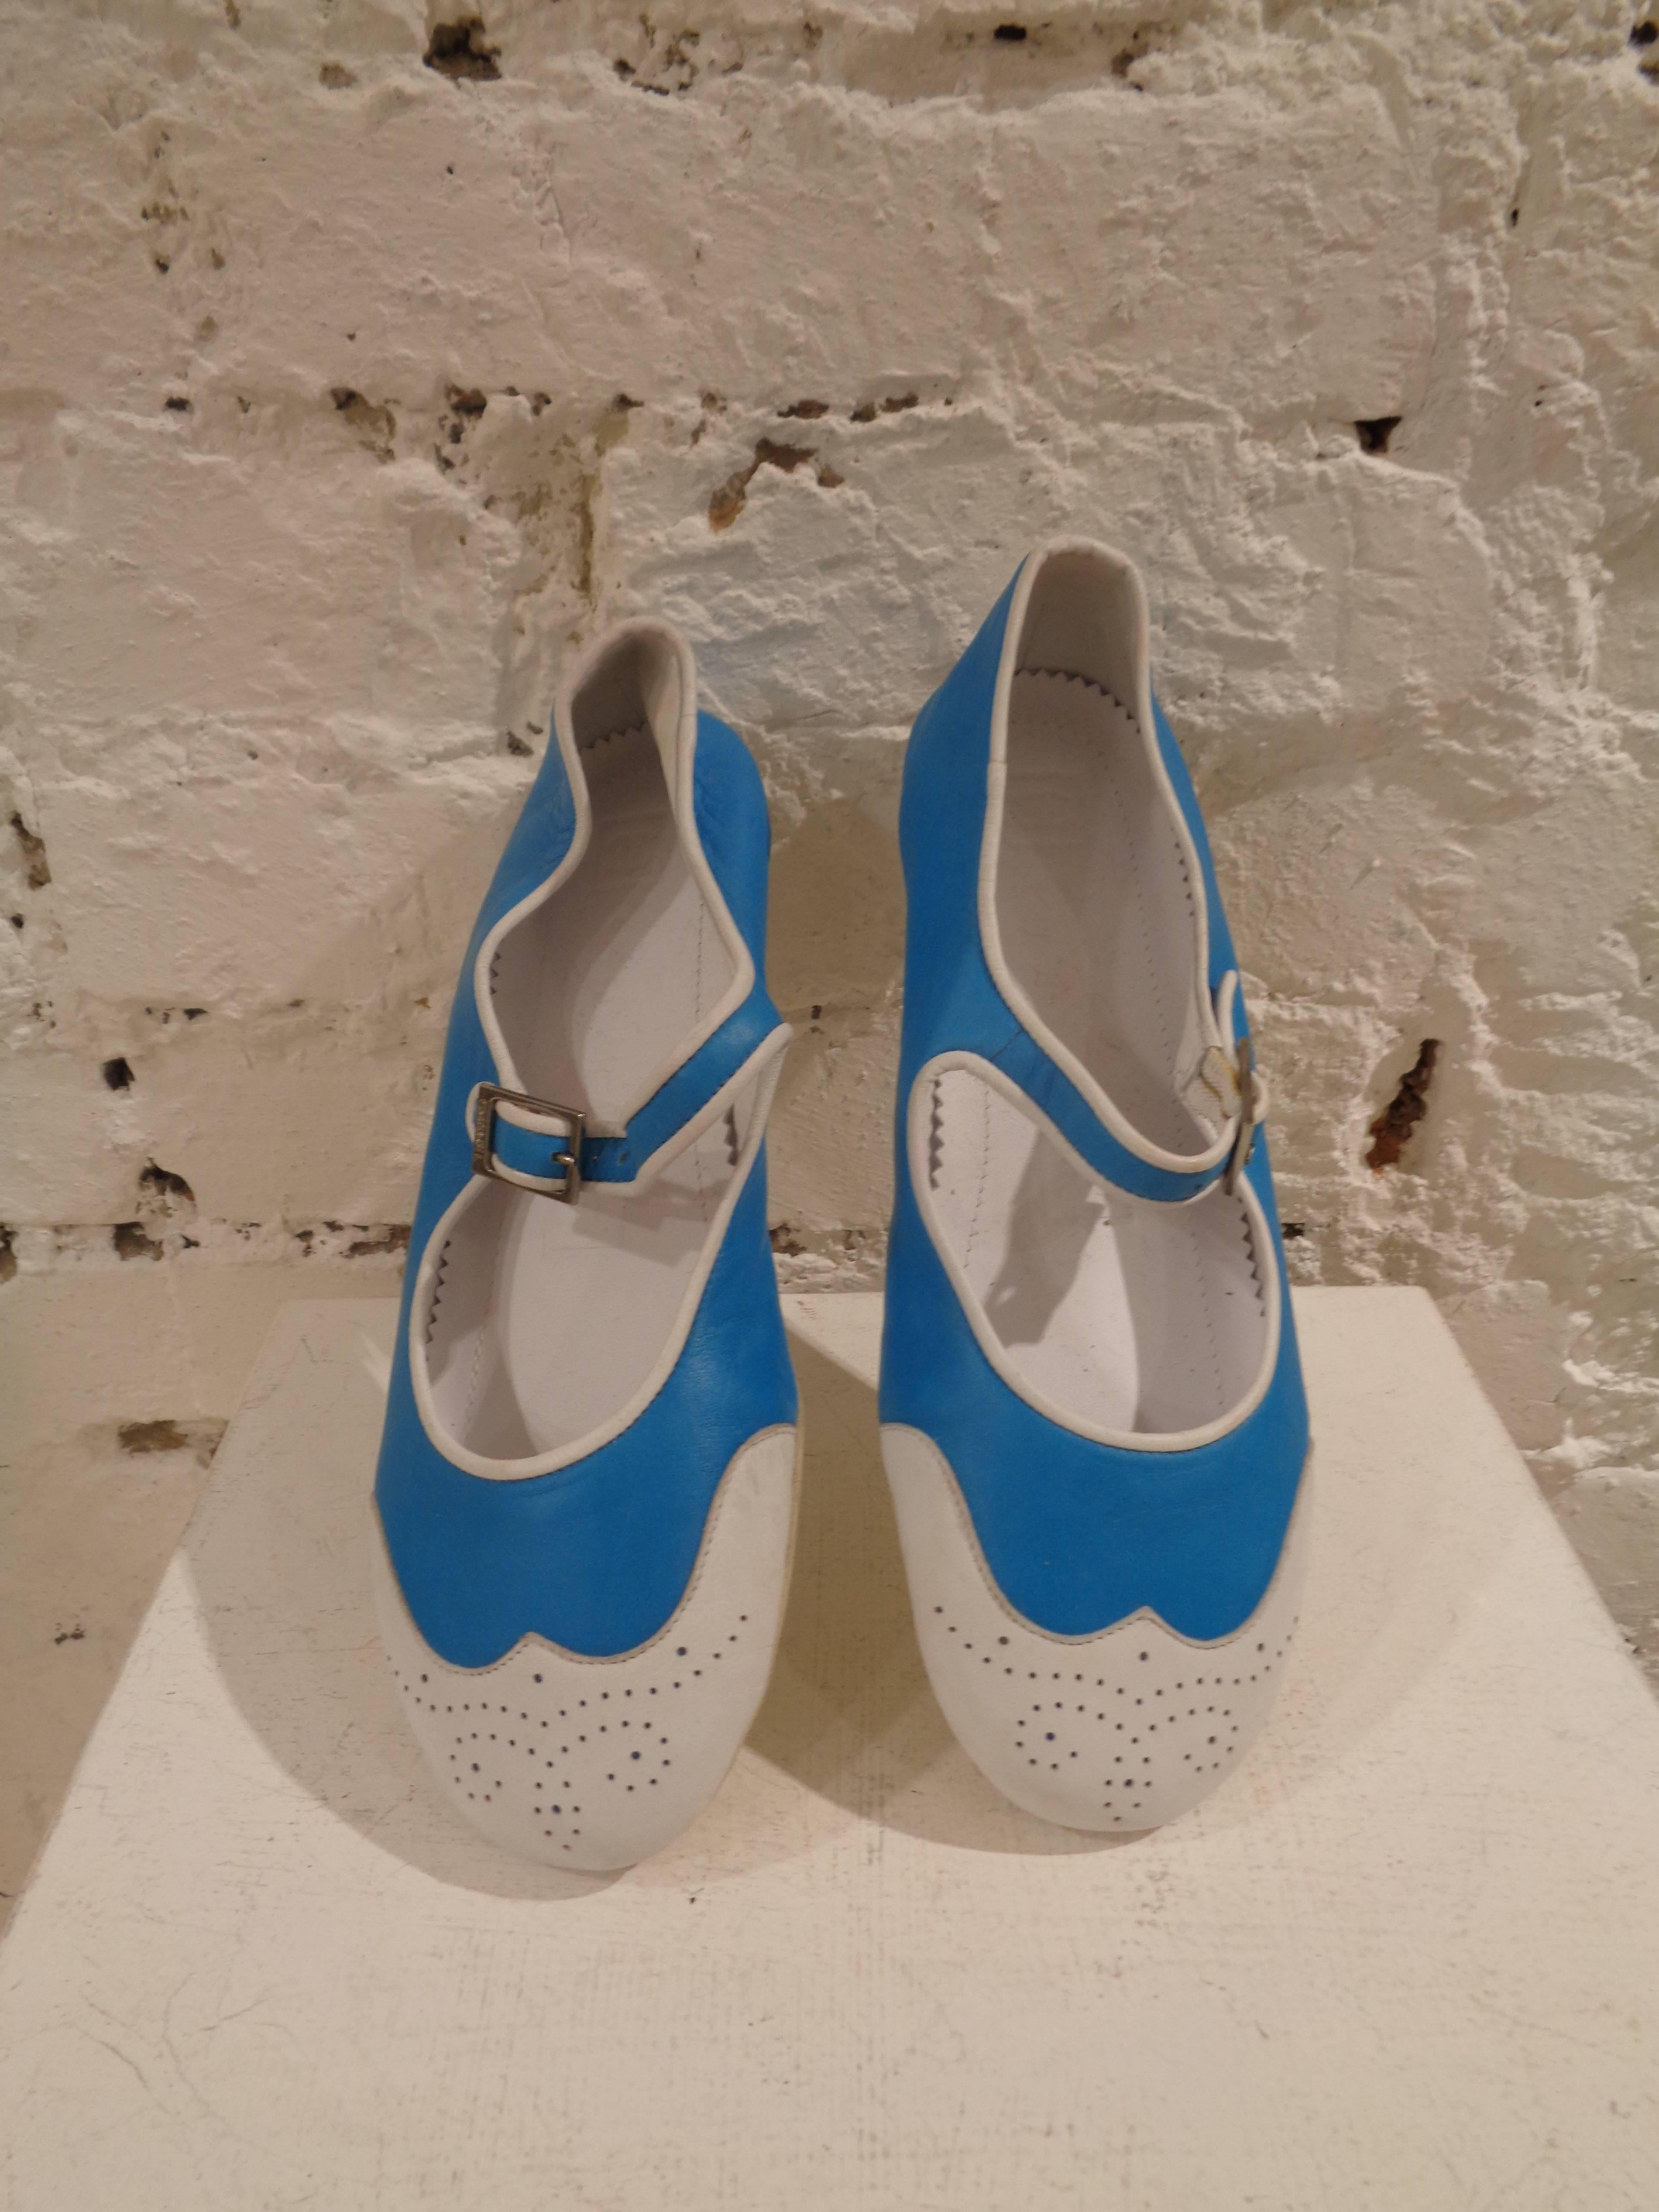 Chanel white and blu ballerina totally made in italy in size 36

unworn